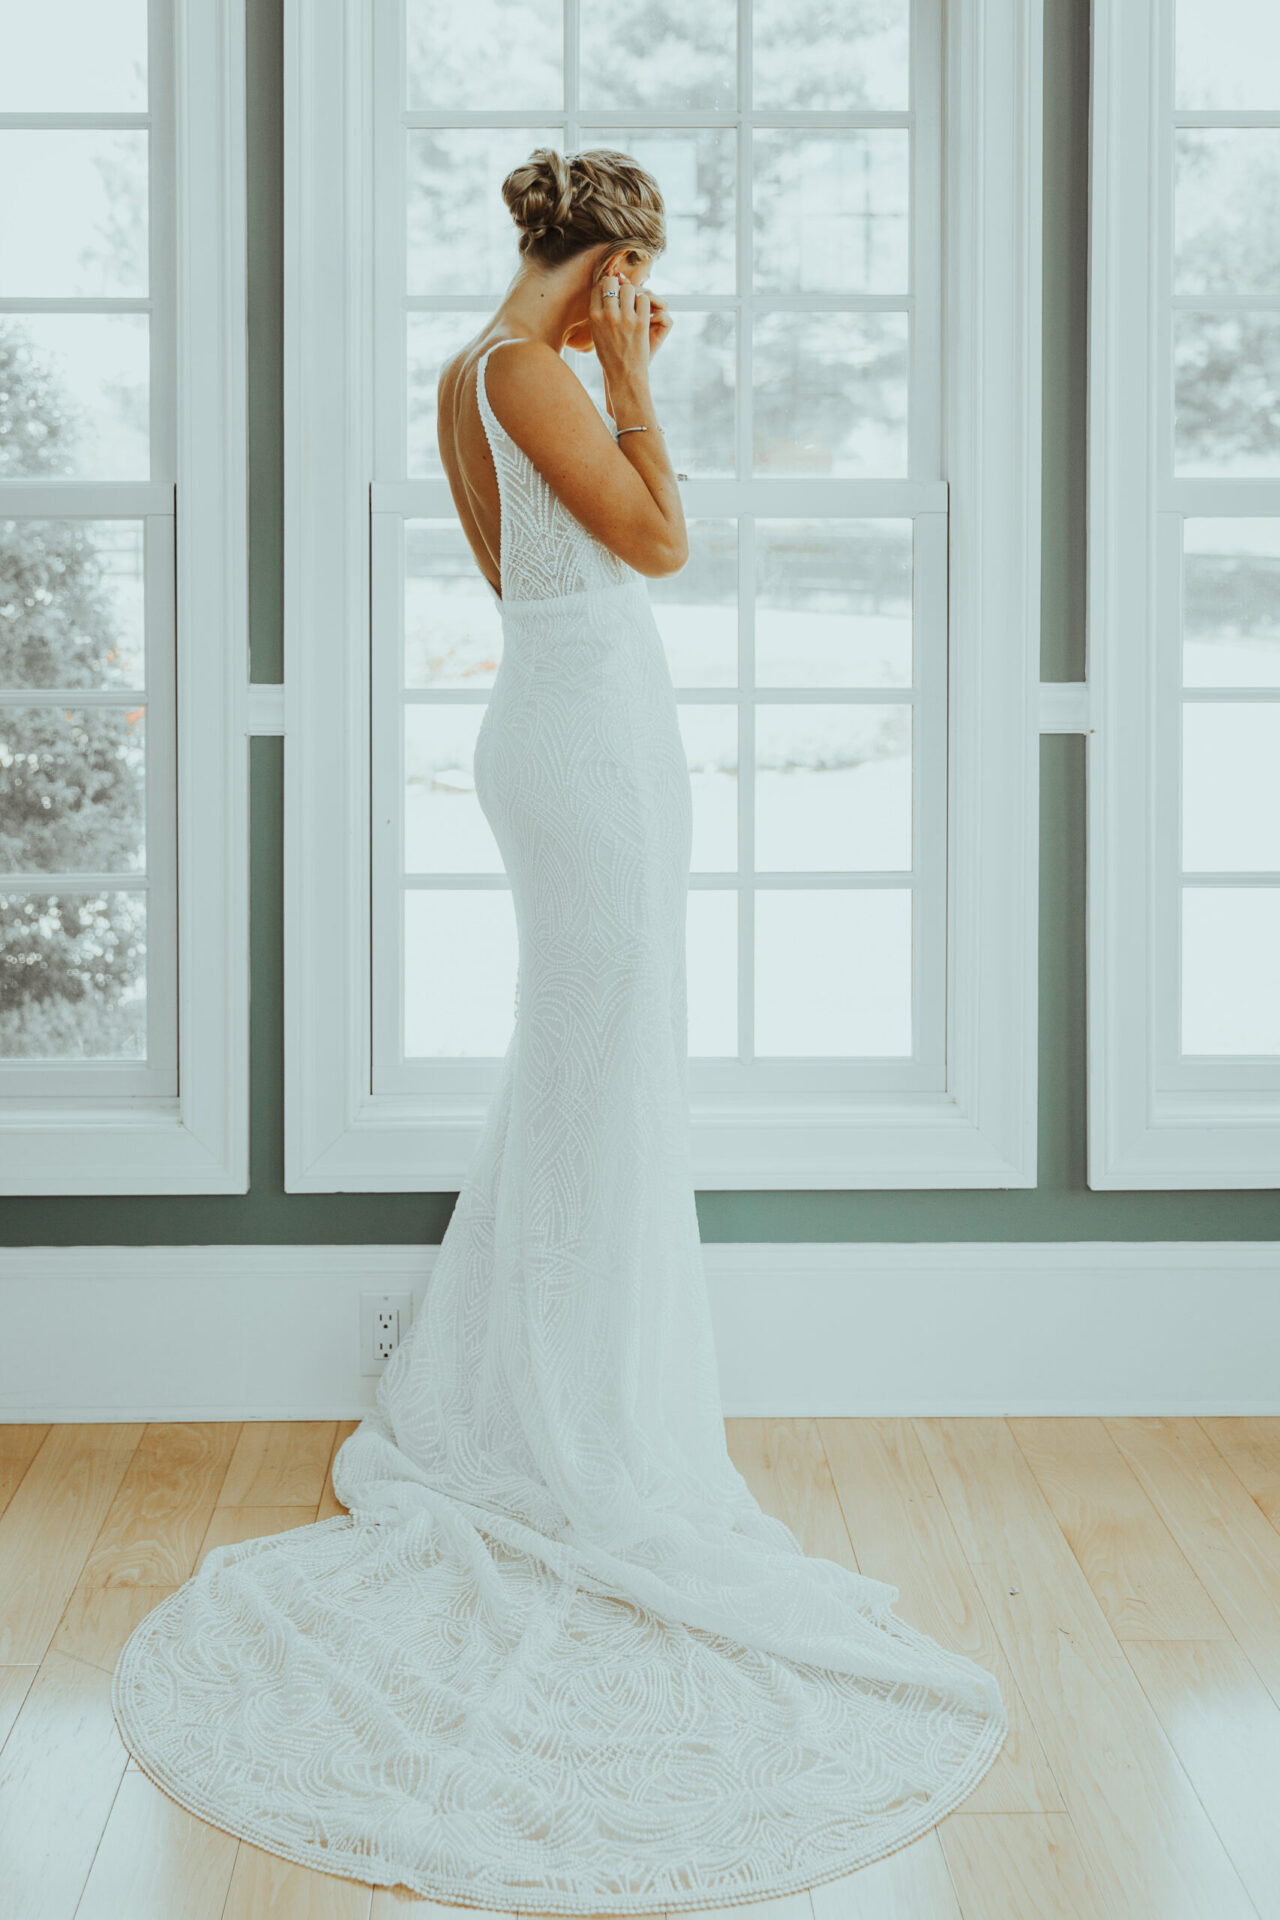 Zion Springs Real Wedding bride standing in front of white window in wedding dress fixing her earring